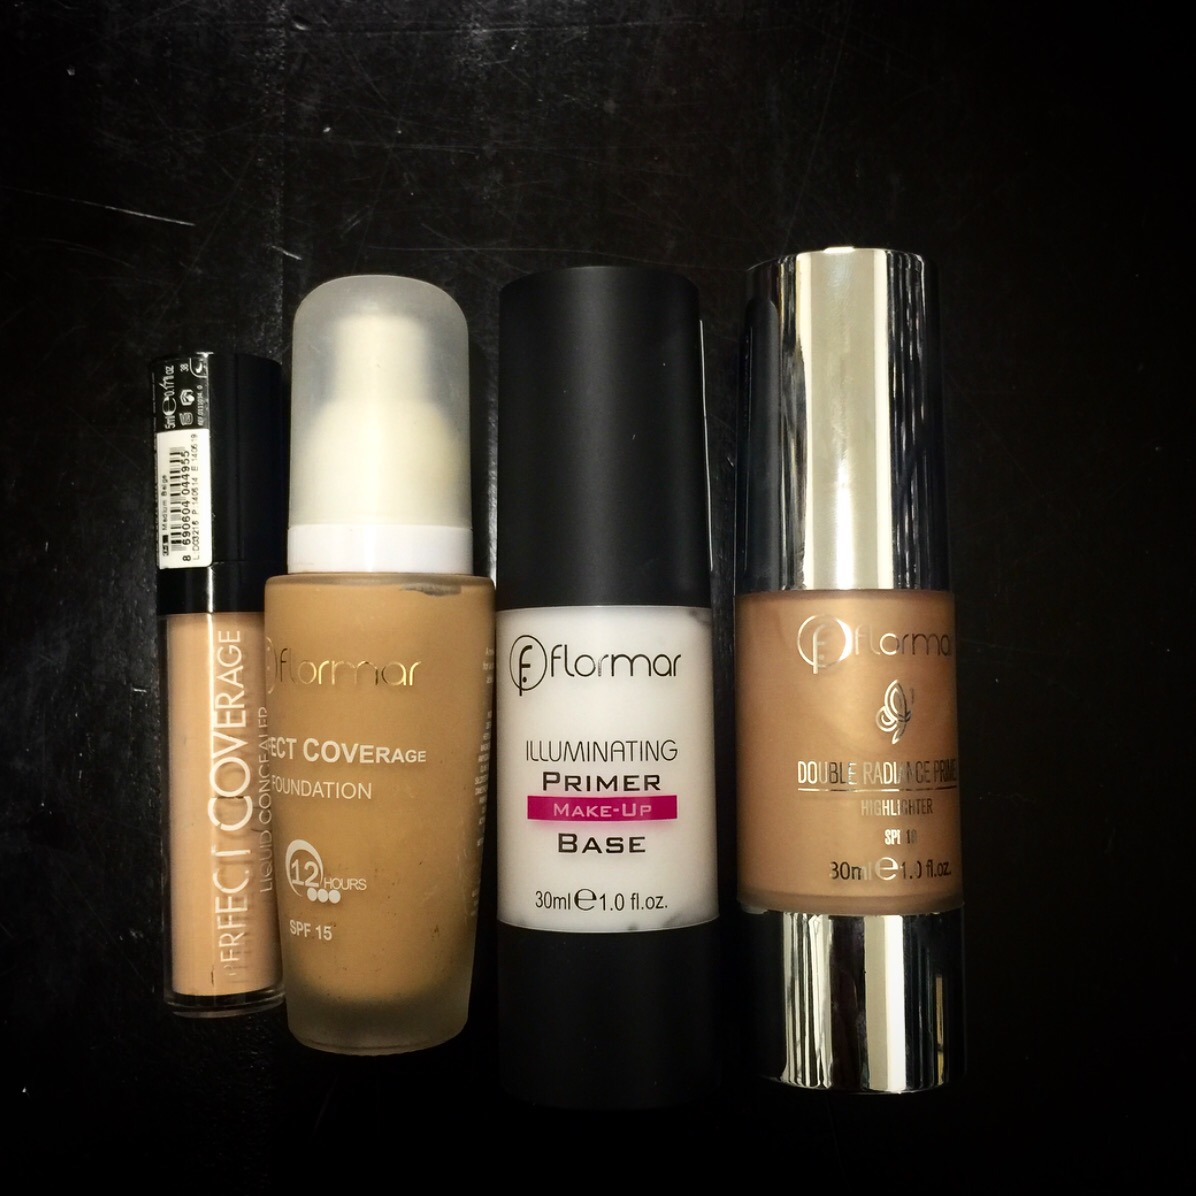 FLORMAR PERFECT COVERAGE FOUNDATION - 30ml SPF15